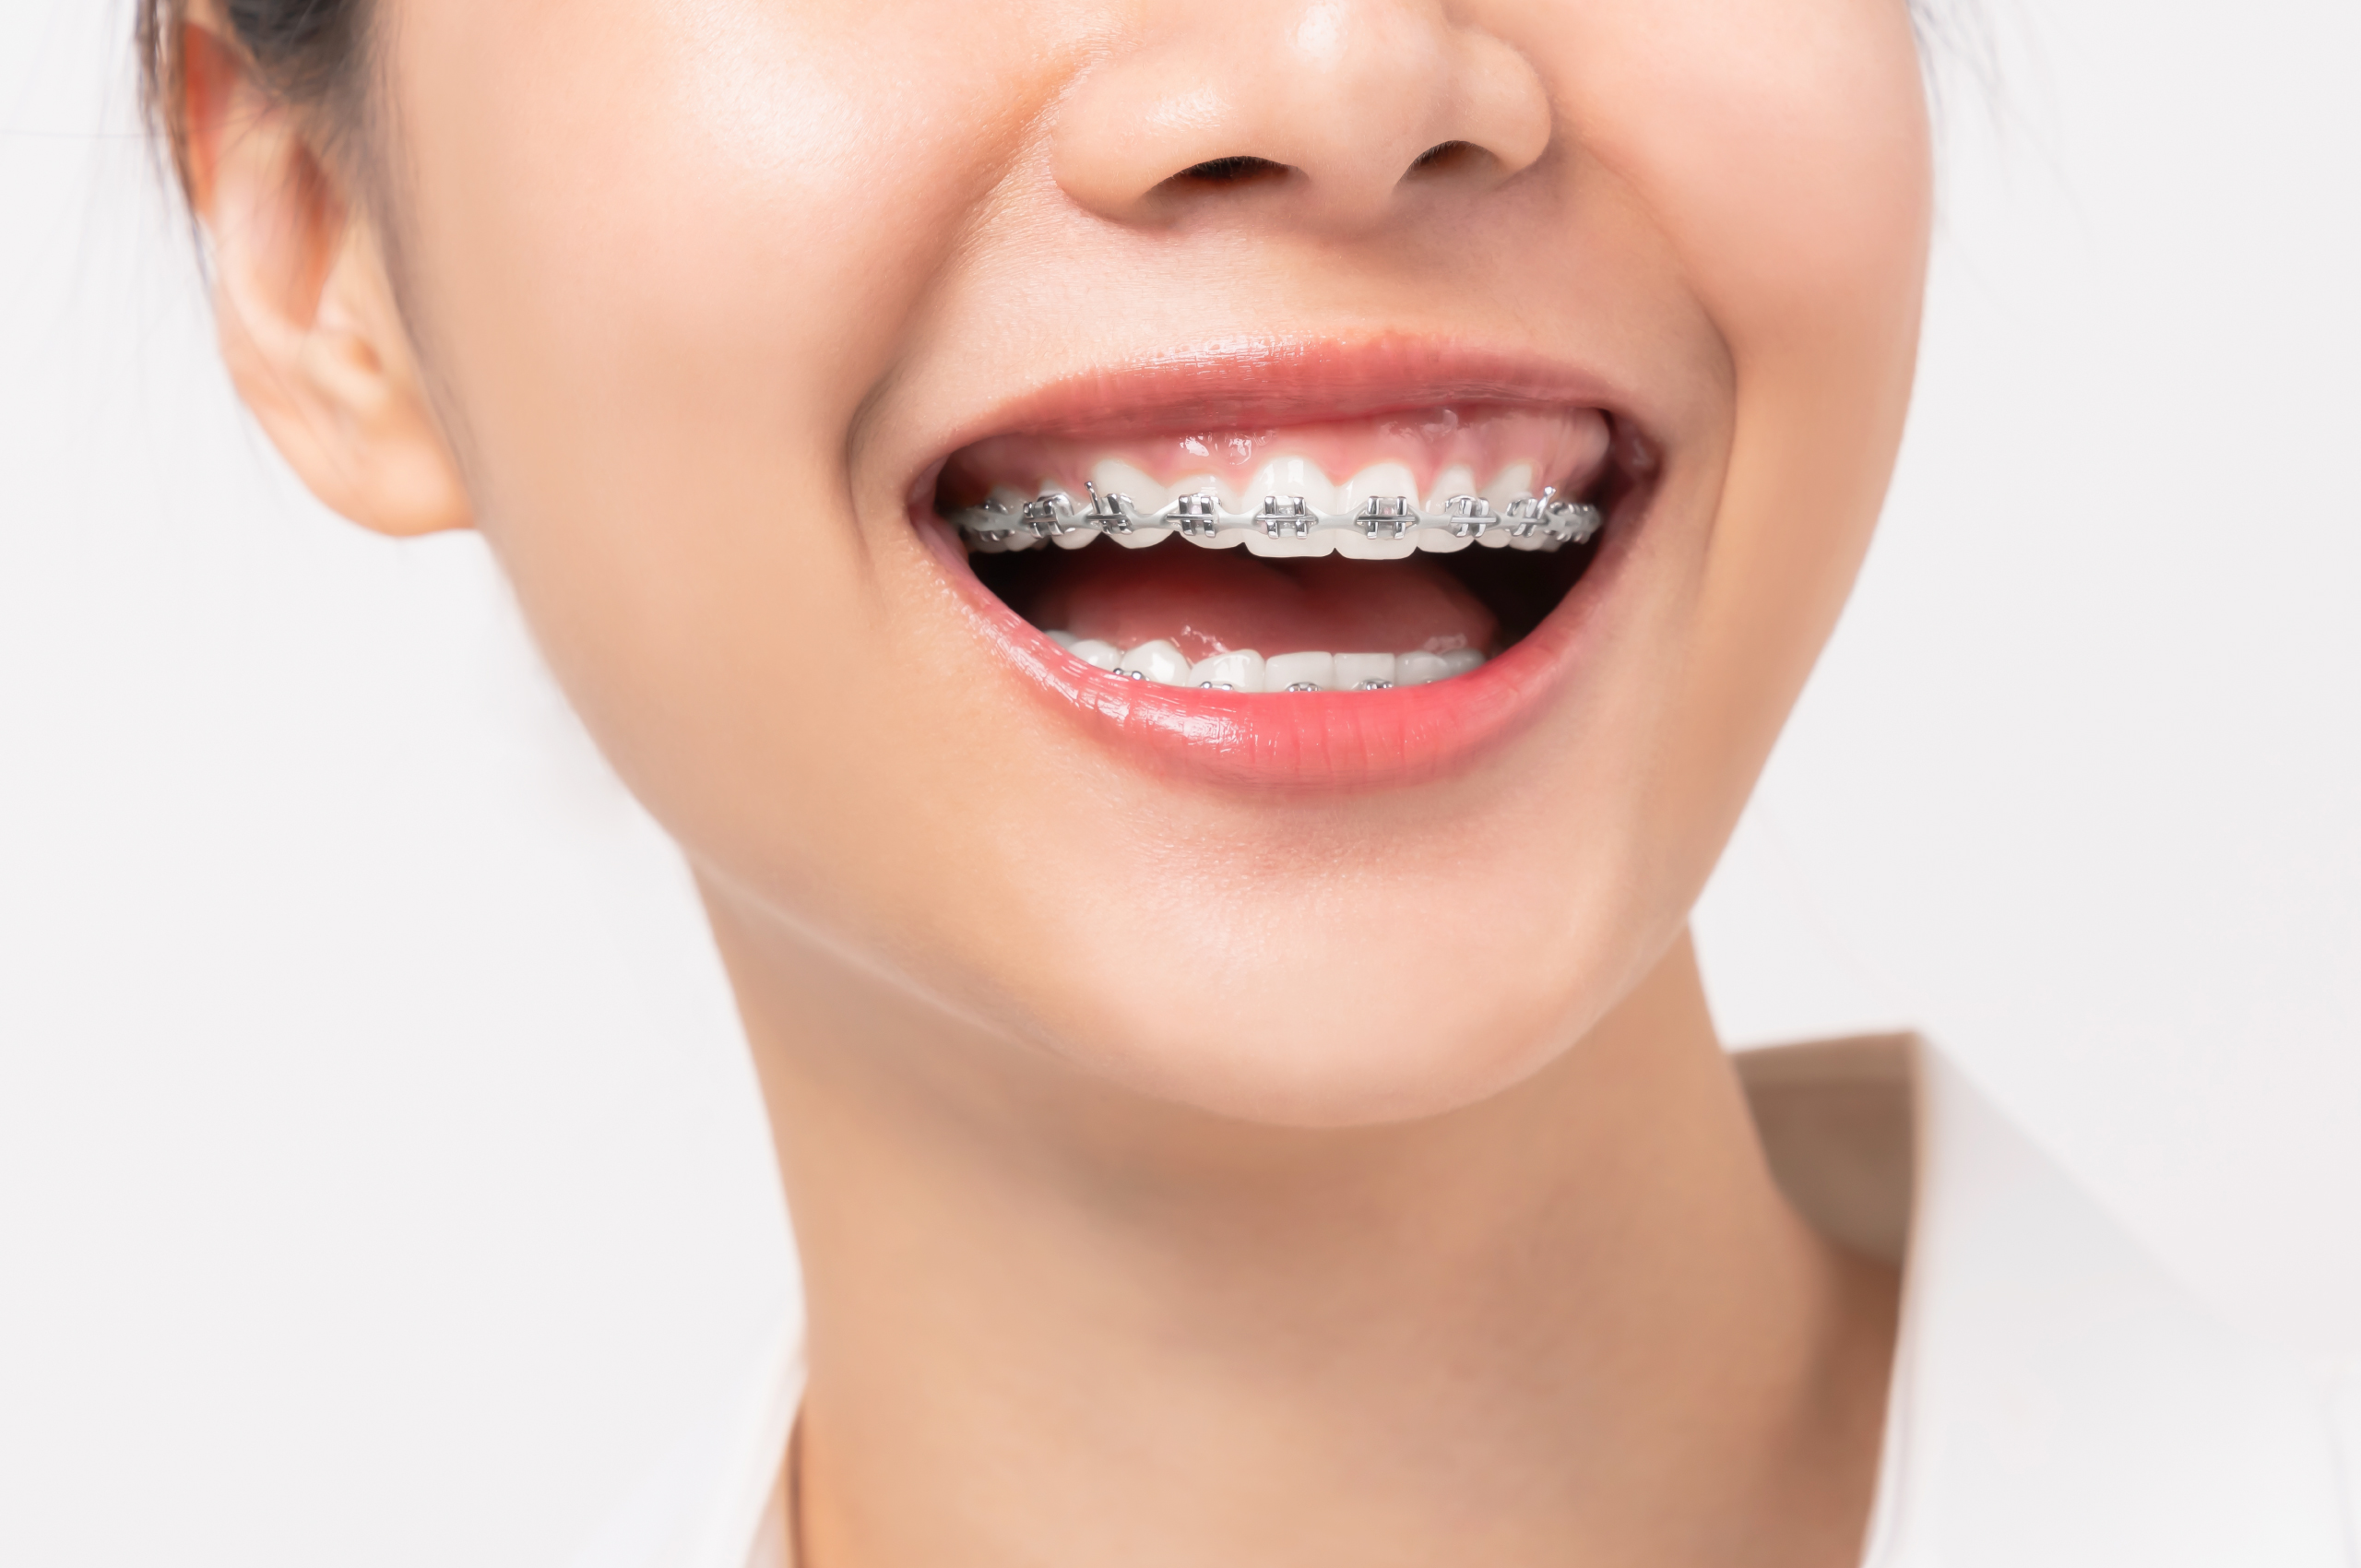 How do orthodontists bond braces to teeth? « Smiles by White